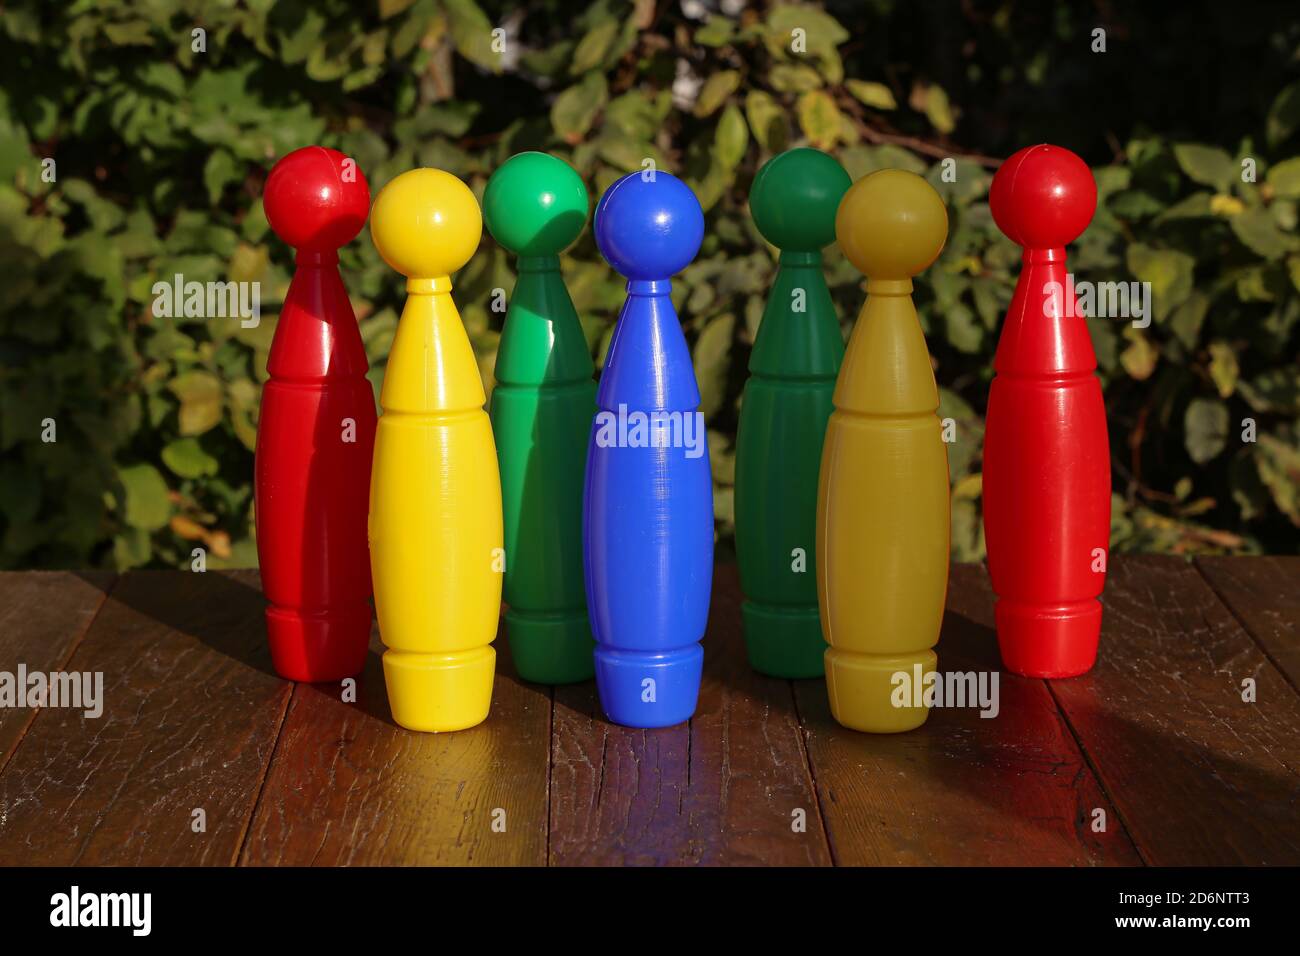 Lot of colorful plastic toy bowling pins on a wooden surface Stock Photo